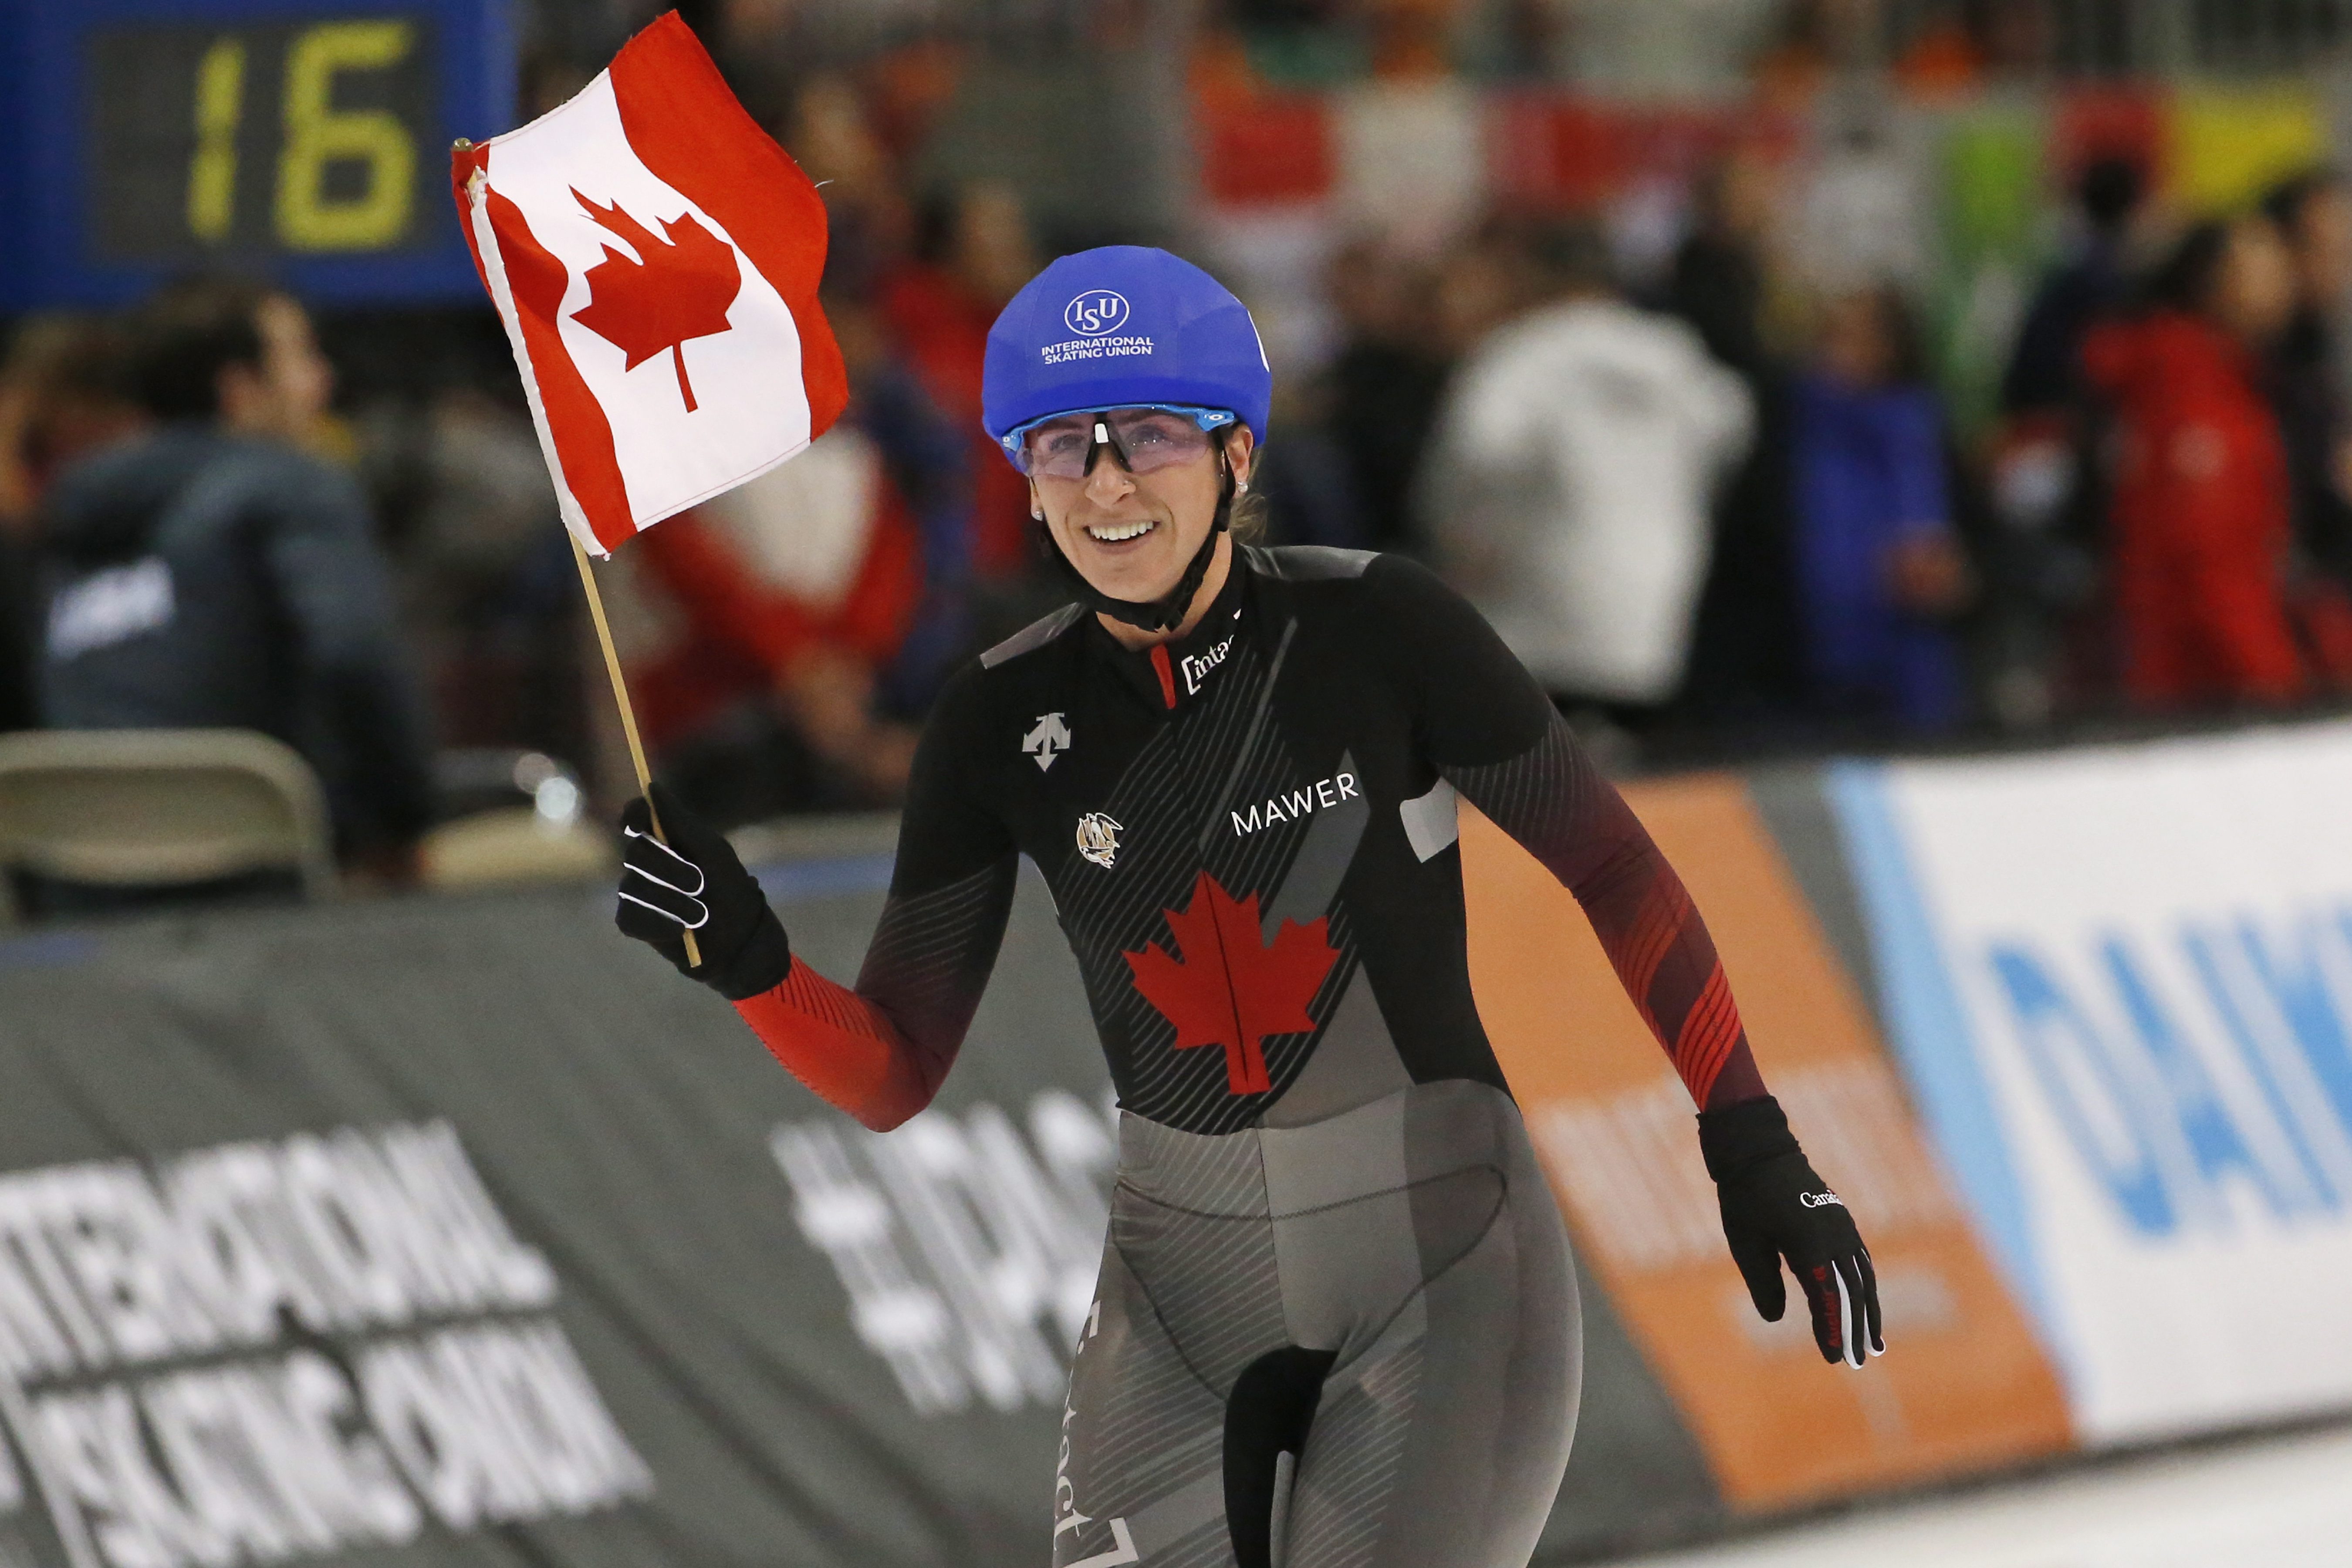 Speed skater takes victory lap waving Canadian flag 